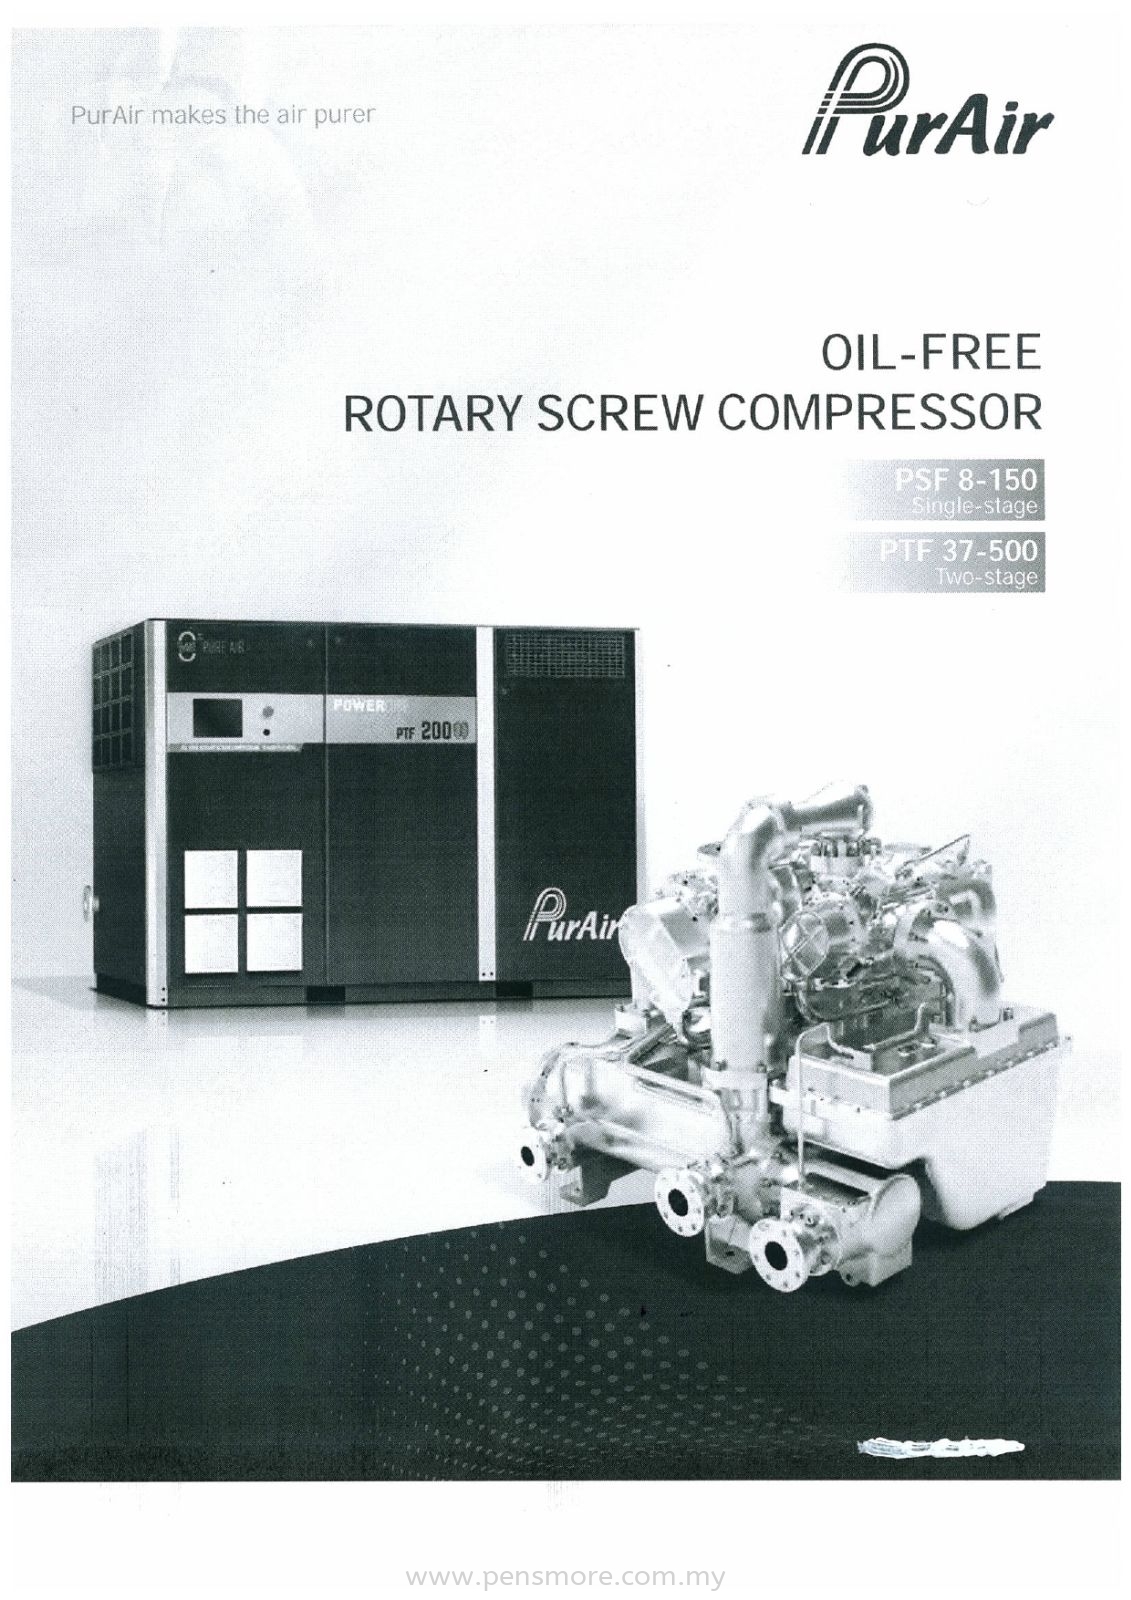 PURAIR -PSF 8-150 Single -Stage/PTF 37-500 Two-Stage  Oil-Free Rotary Screw Compressor